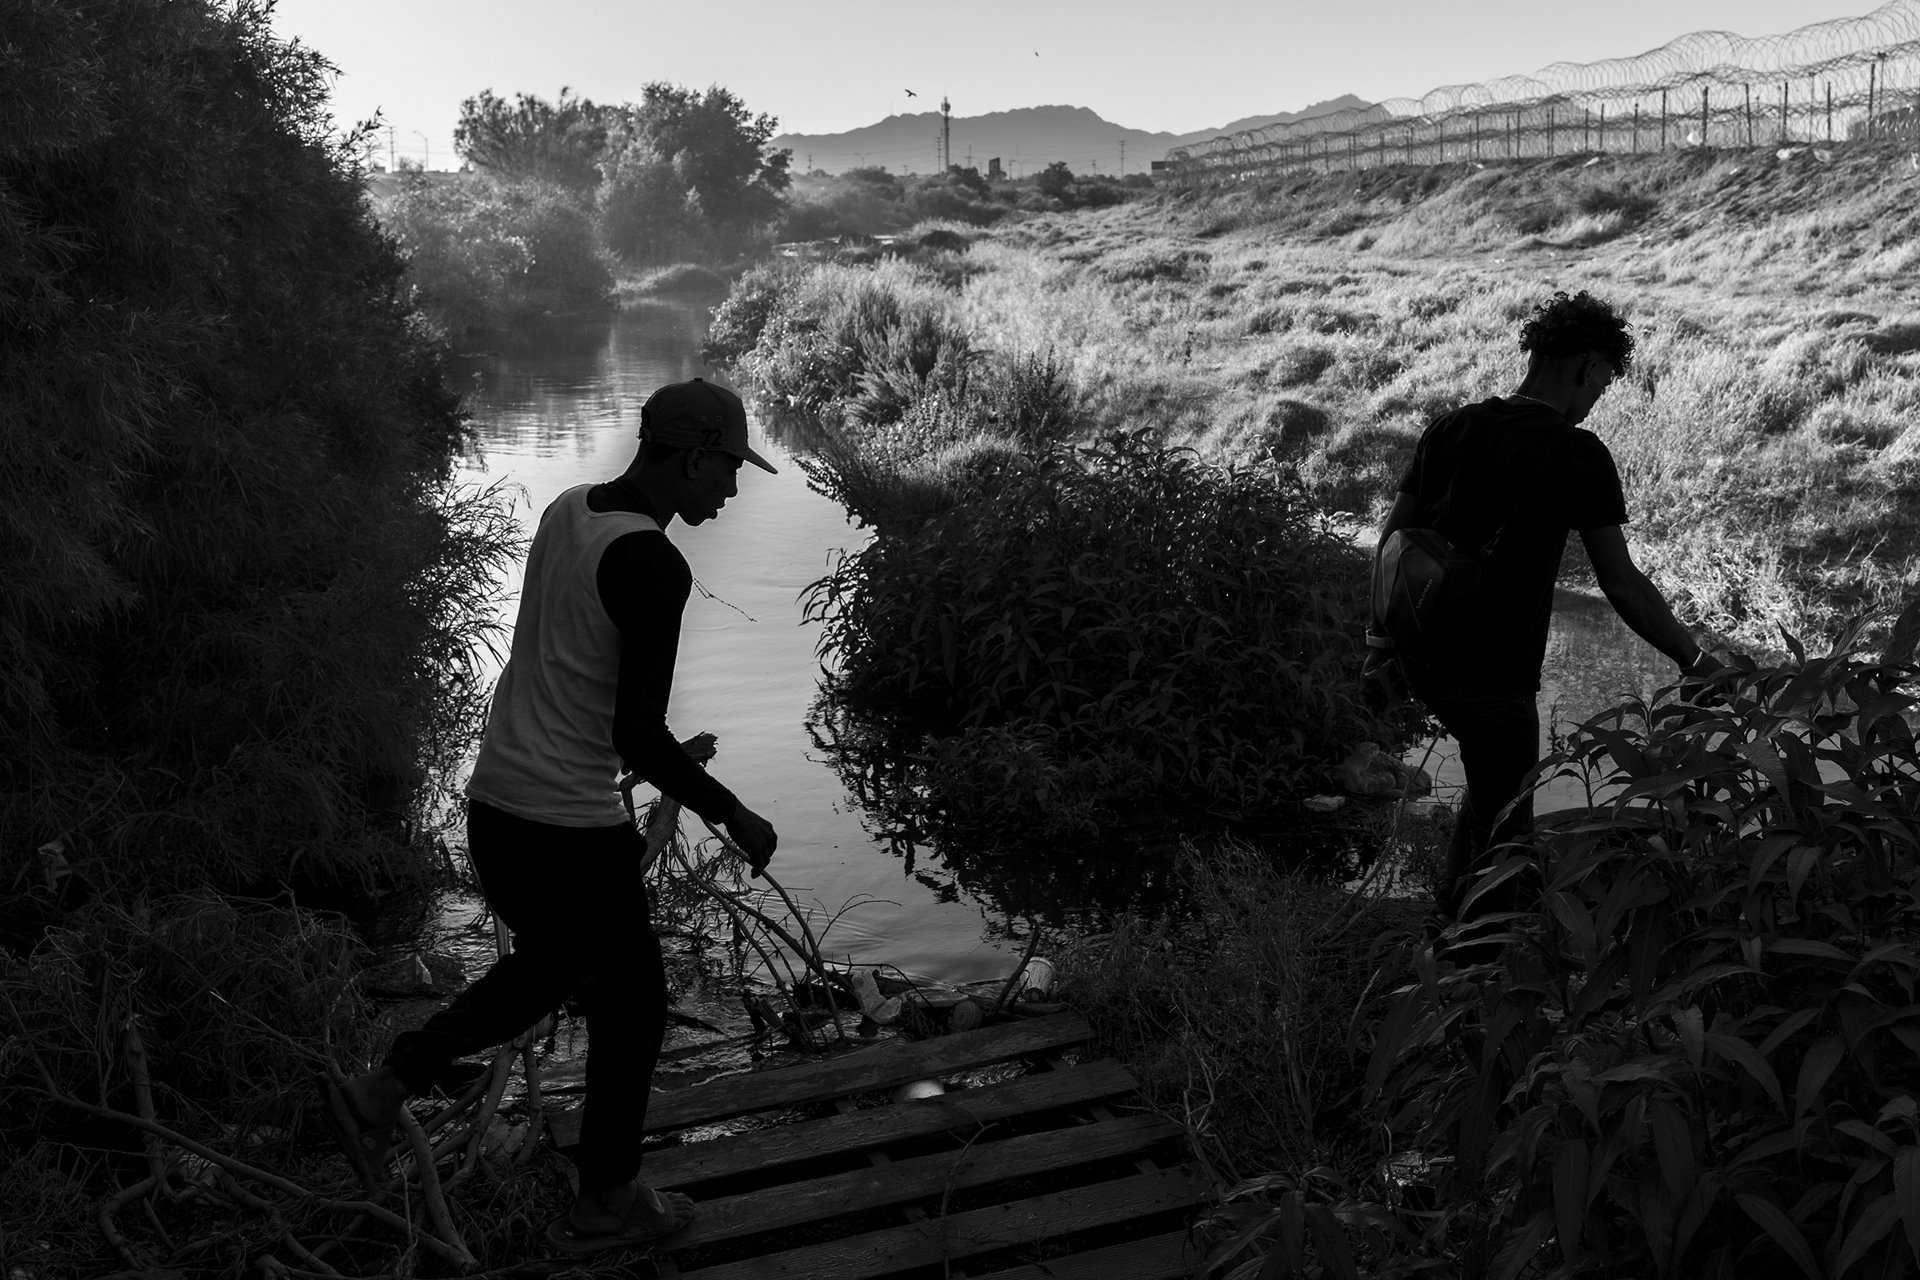 Venezuelan migrants cross the Rio Bravo river from Mexico to the United States to surrender to the border patrol and ask for asylum before the end of Title 42, a US COVID-19 prevention measure that in effect allowed deportation of migrants without reviewing asylum claims. Toward the end of Title 42, a rush of migrants attempted to cross into the United States and request asylum before they could be punished with criminal charges under the new Title 8 law. Ciudad Juárez, Mexico.&nbsp;